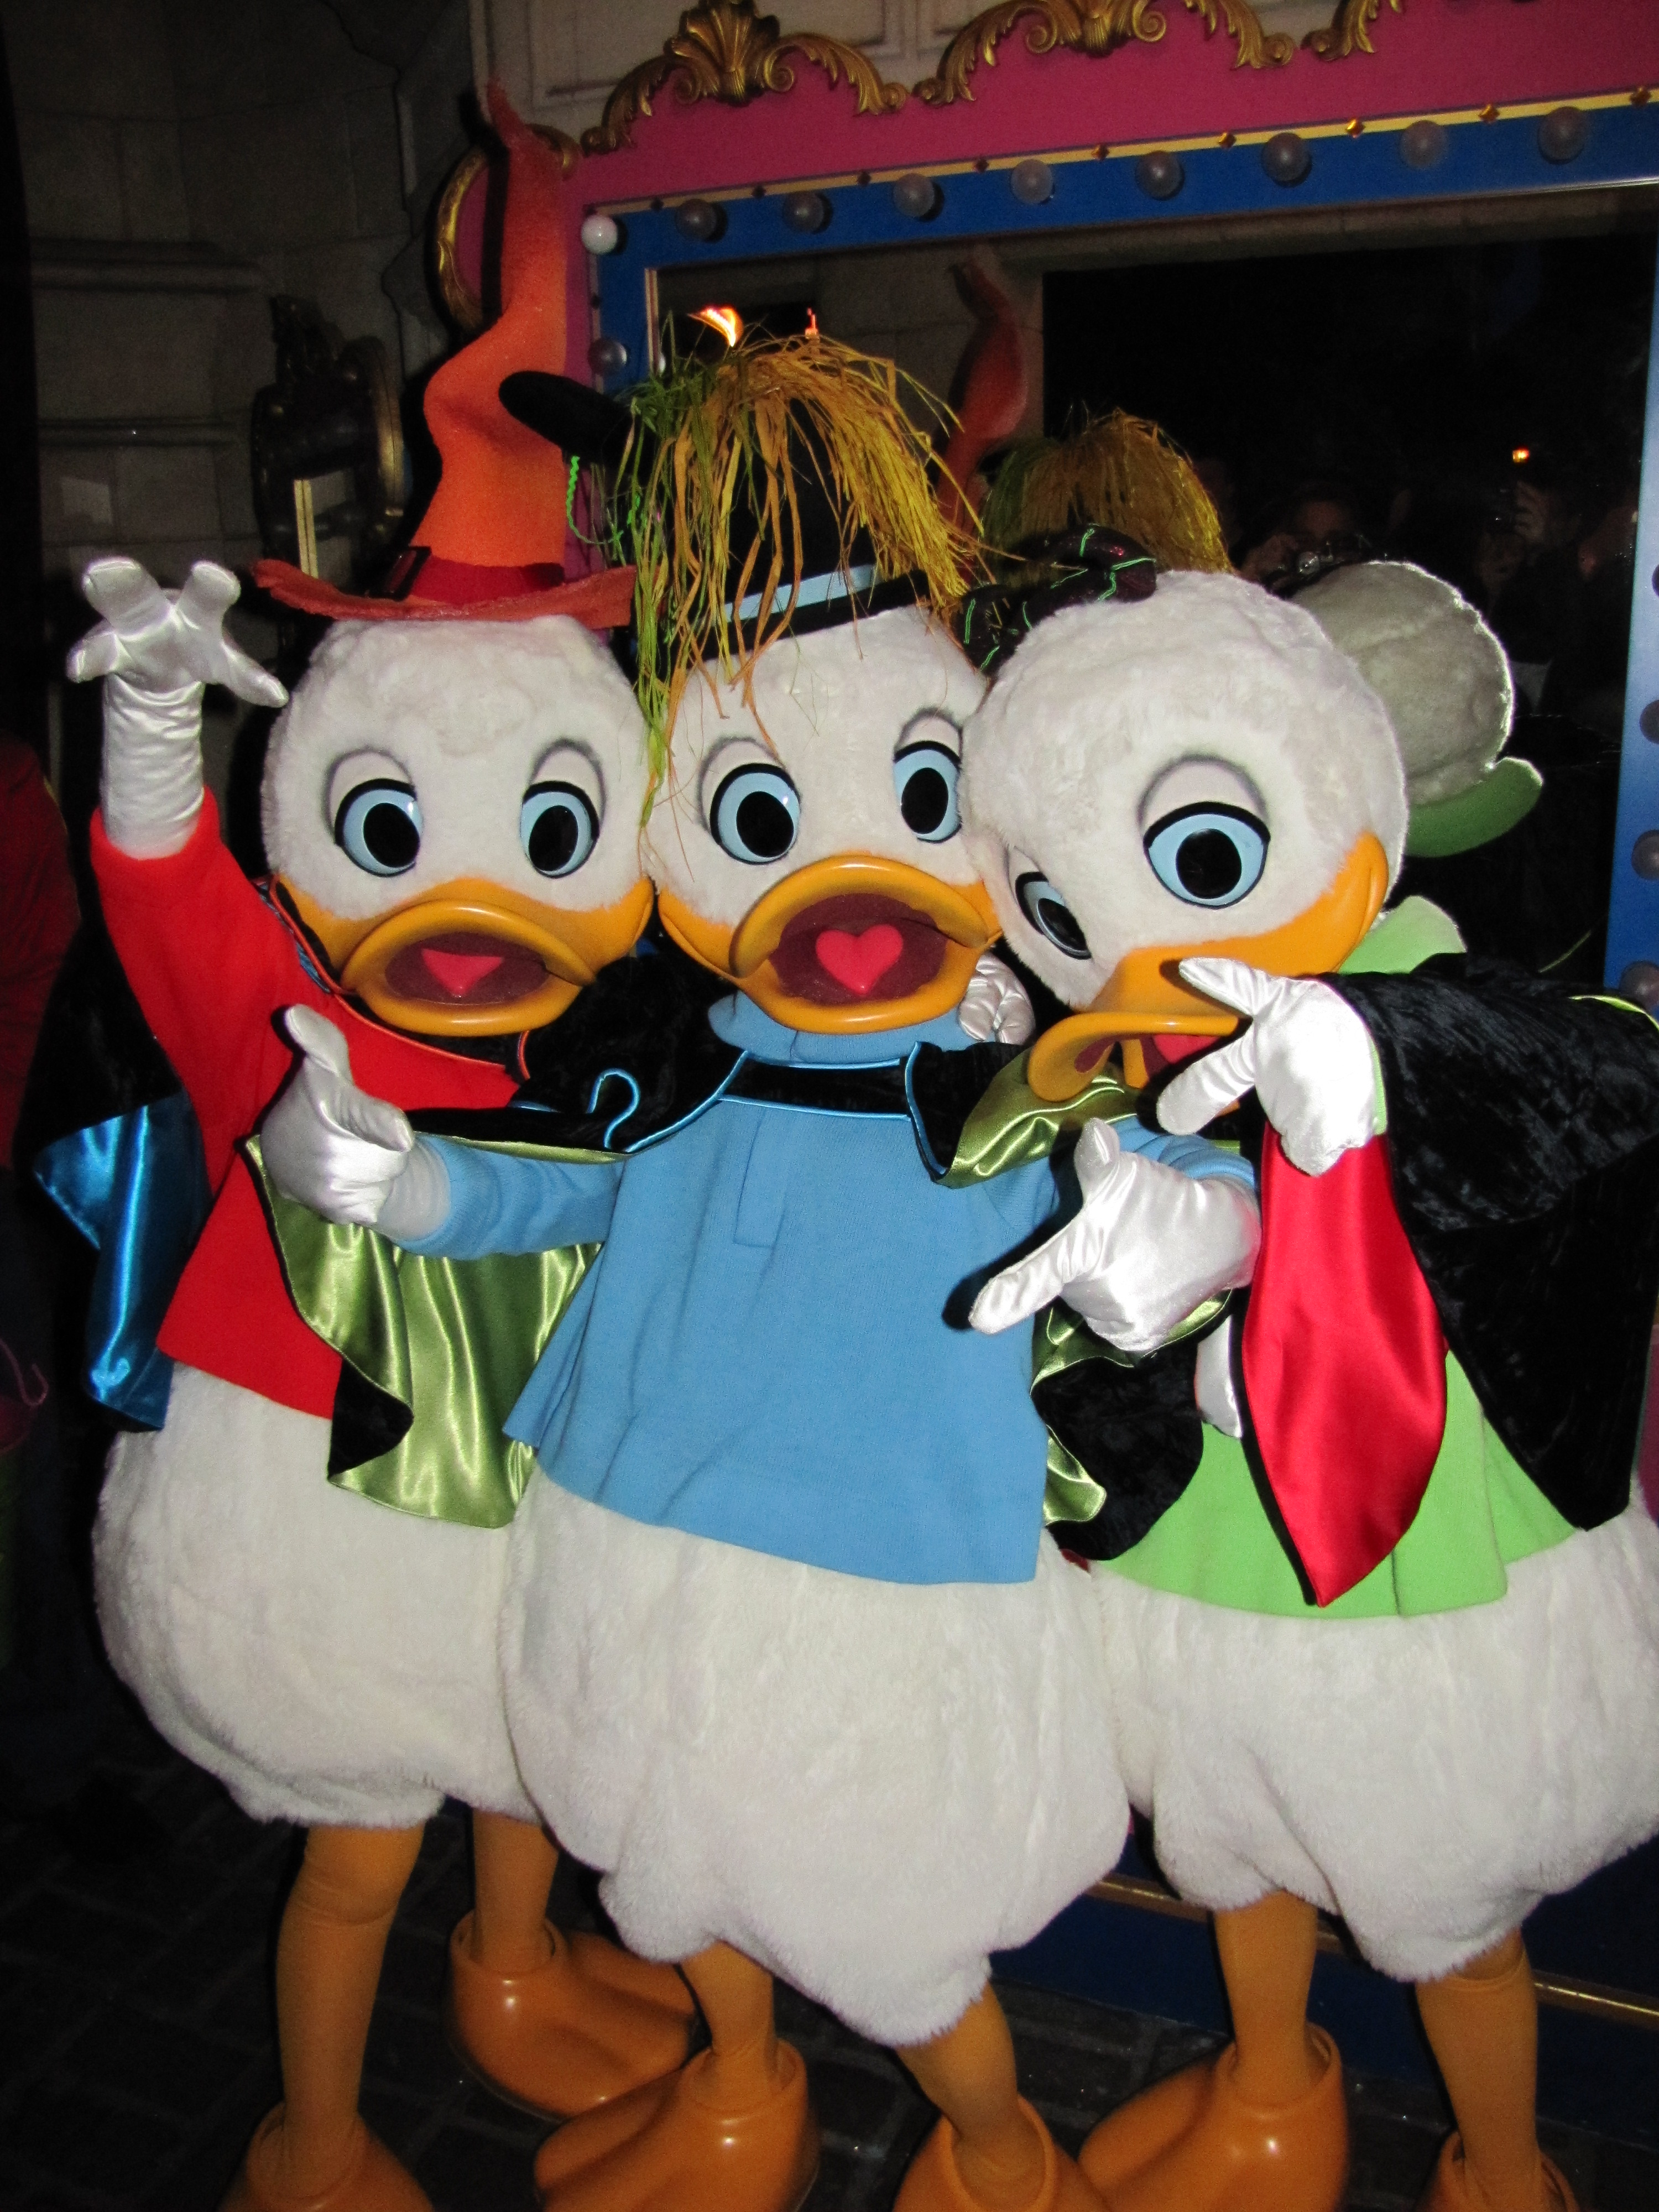 During the Halloween Party on October 31st 2011 Huey, Dewey and Louie did meet'n'greets with guests. This was the first time the three came out to greet guests at Disneyland Paris.